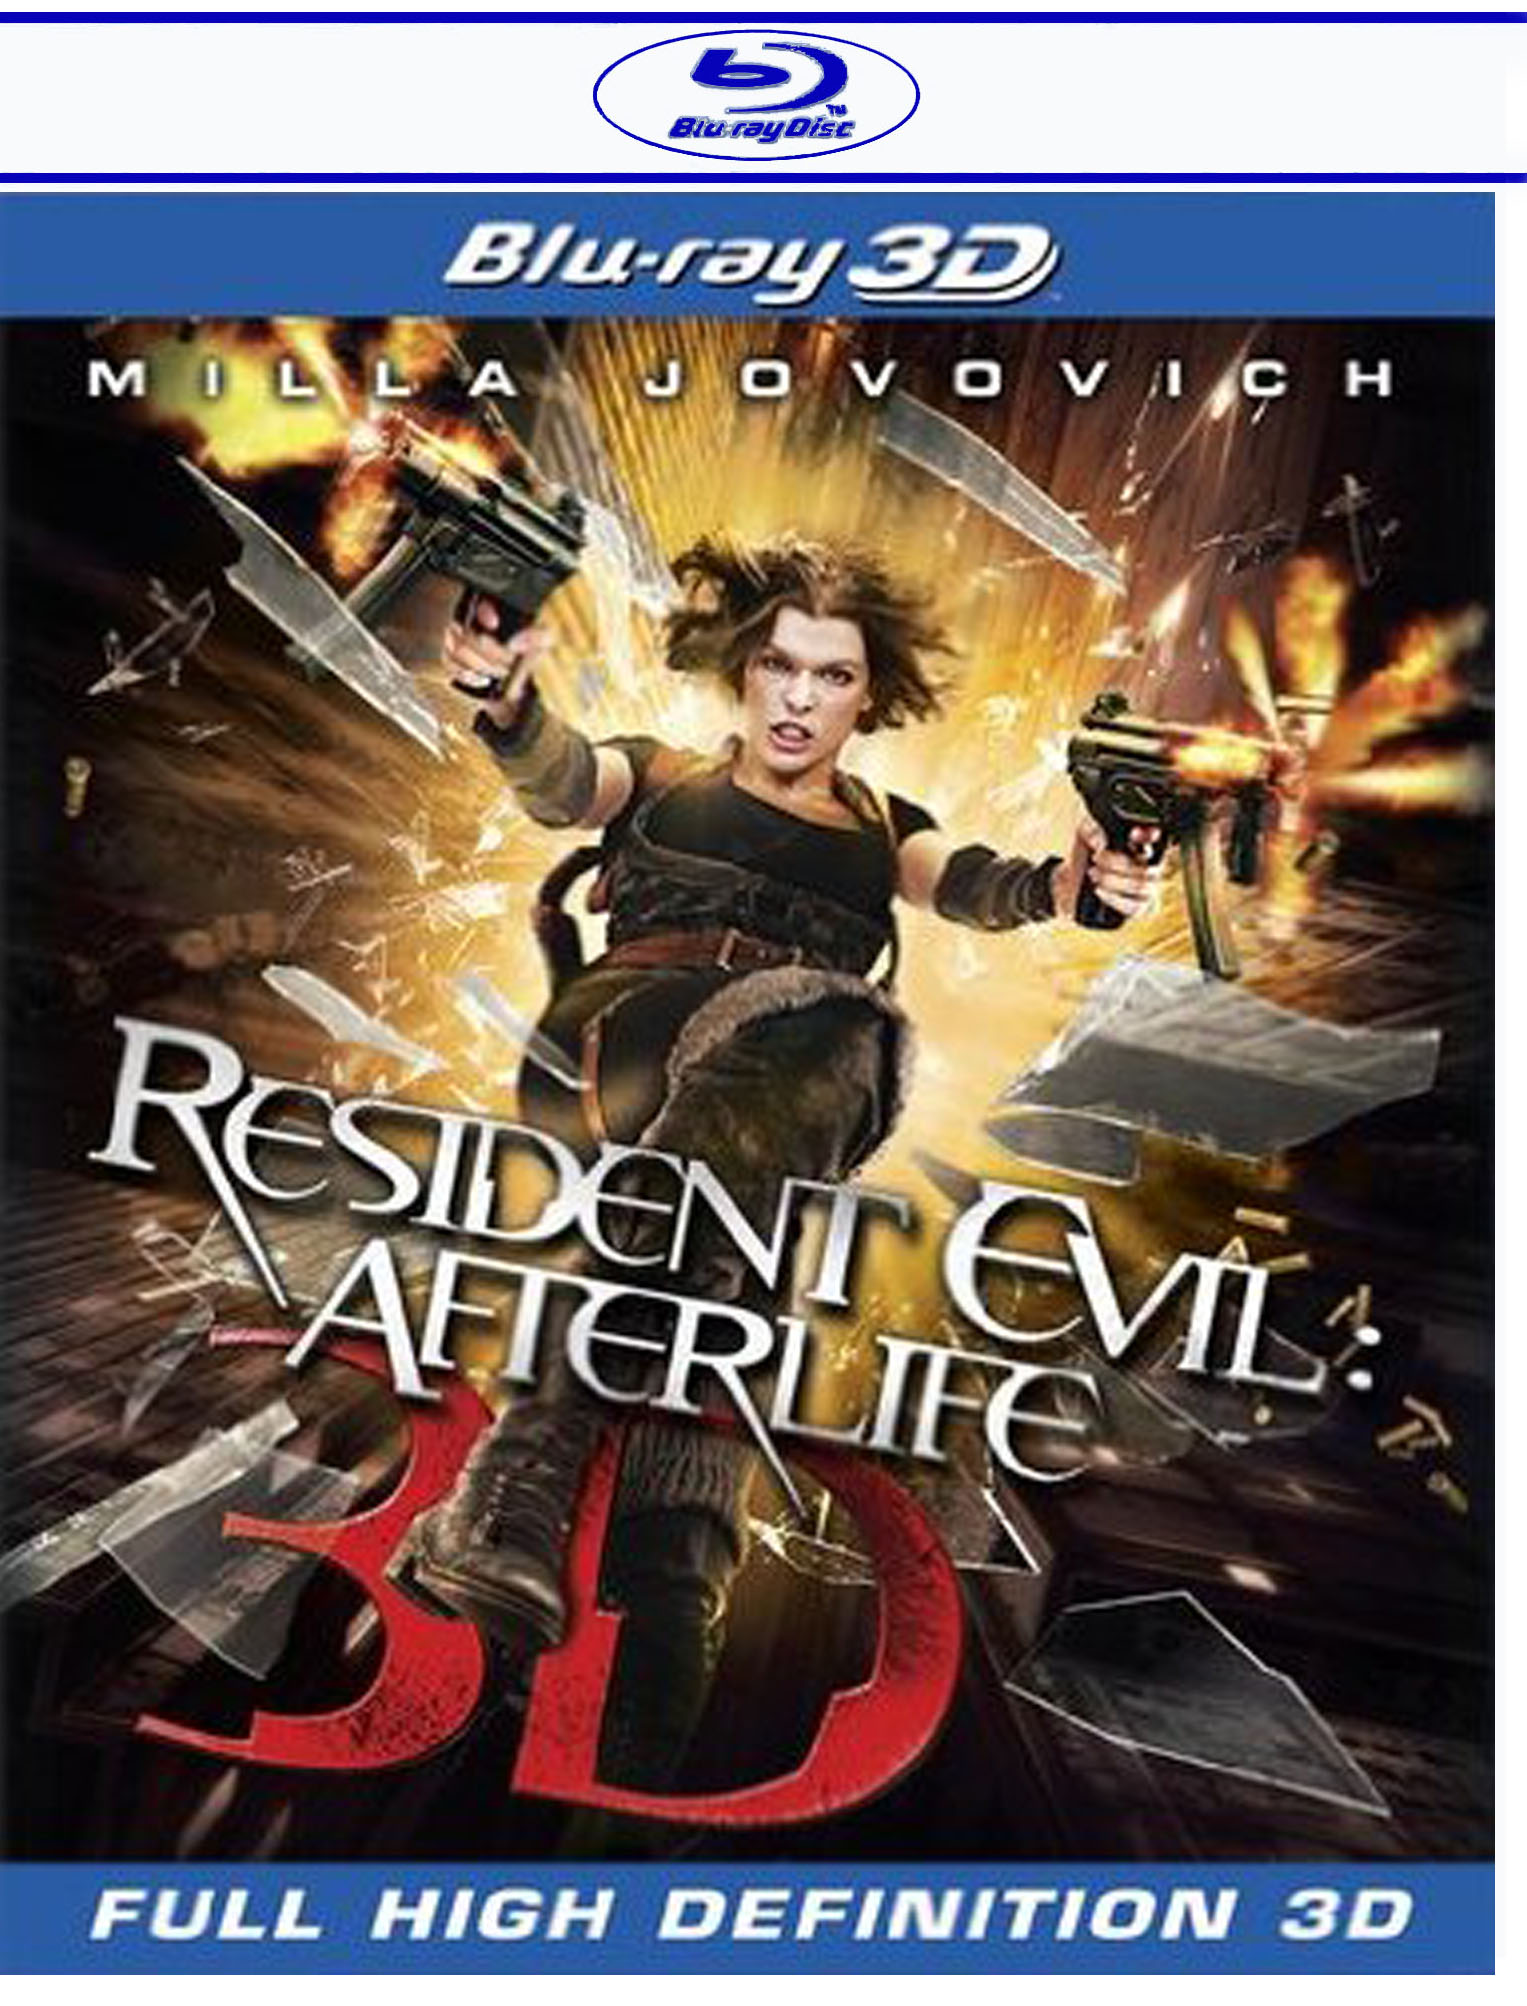 Resident Evil: Afterlife (2010) Stream and Watch Online